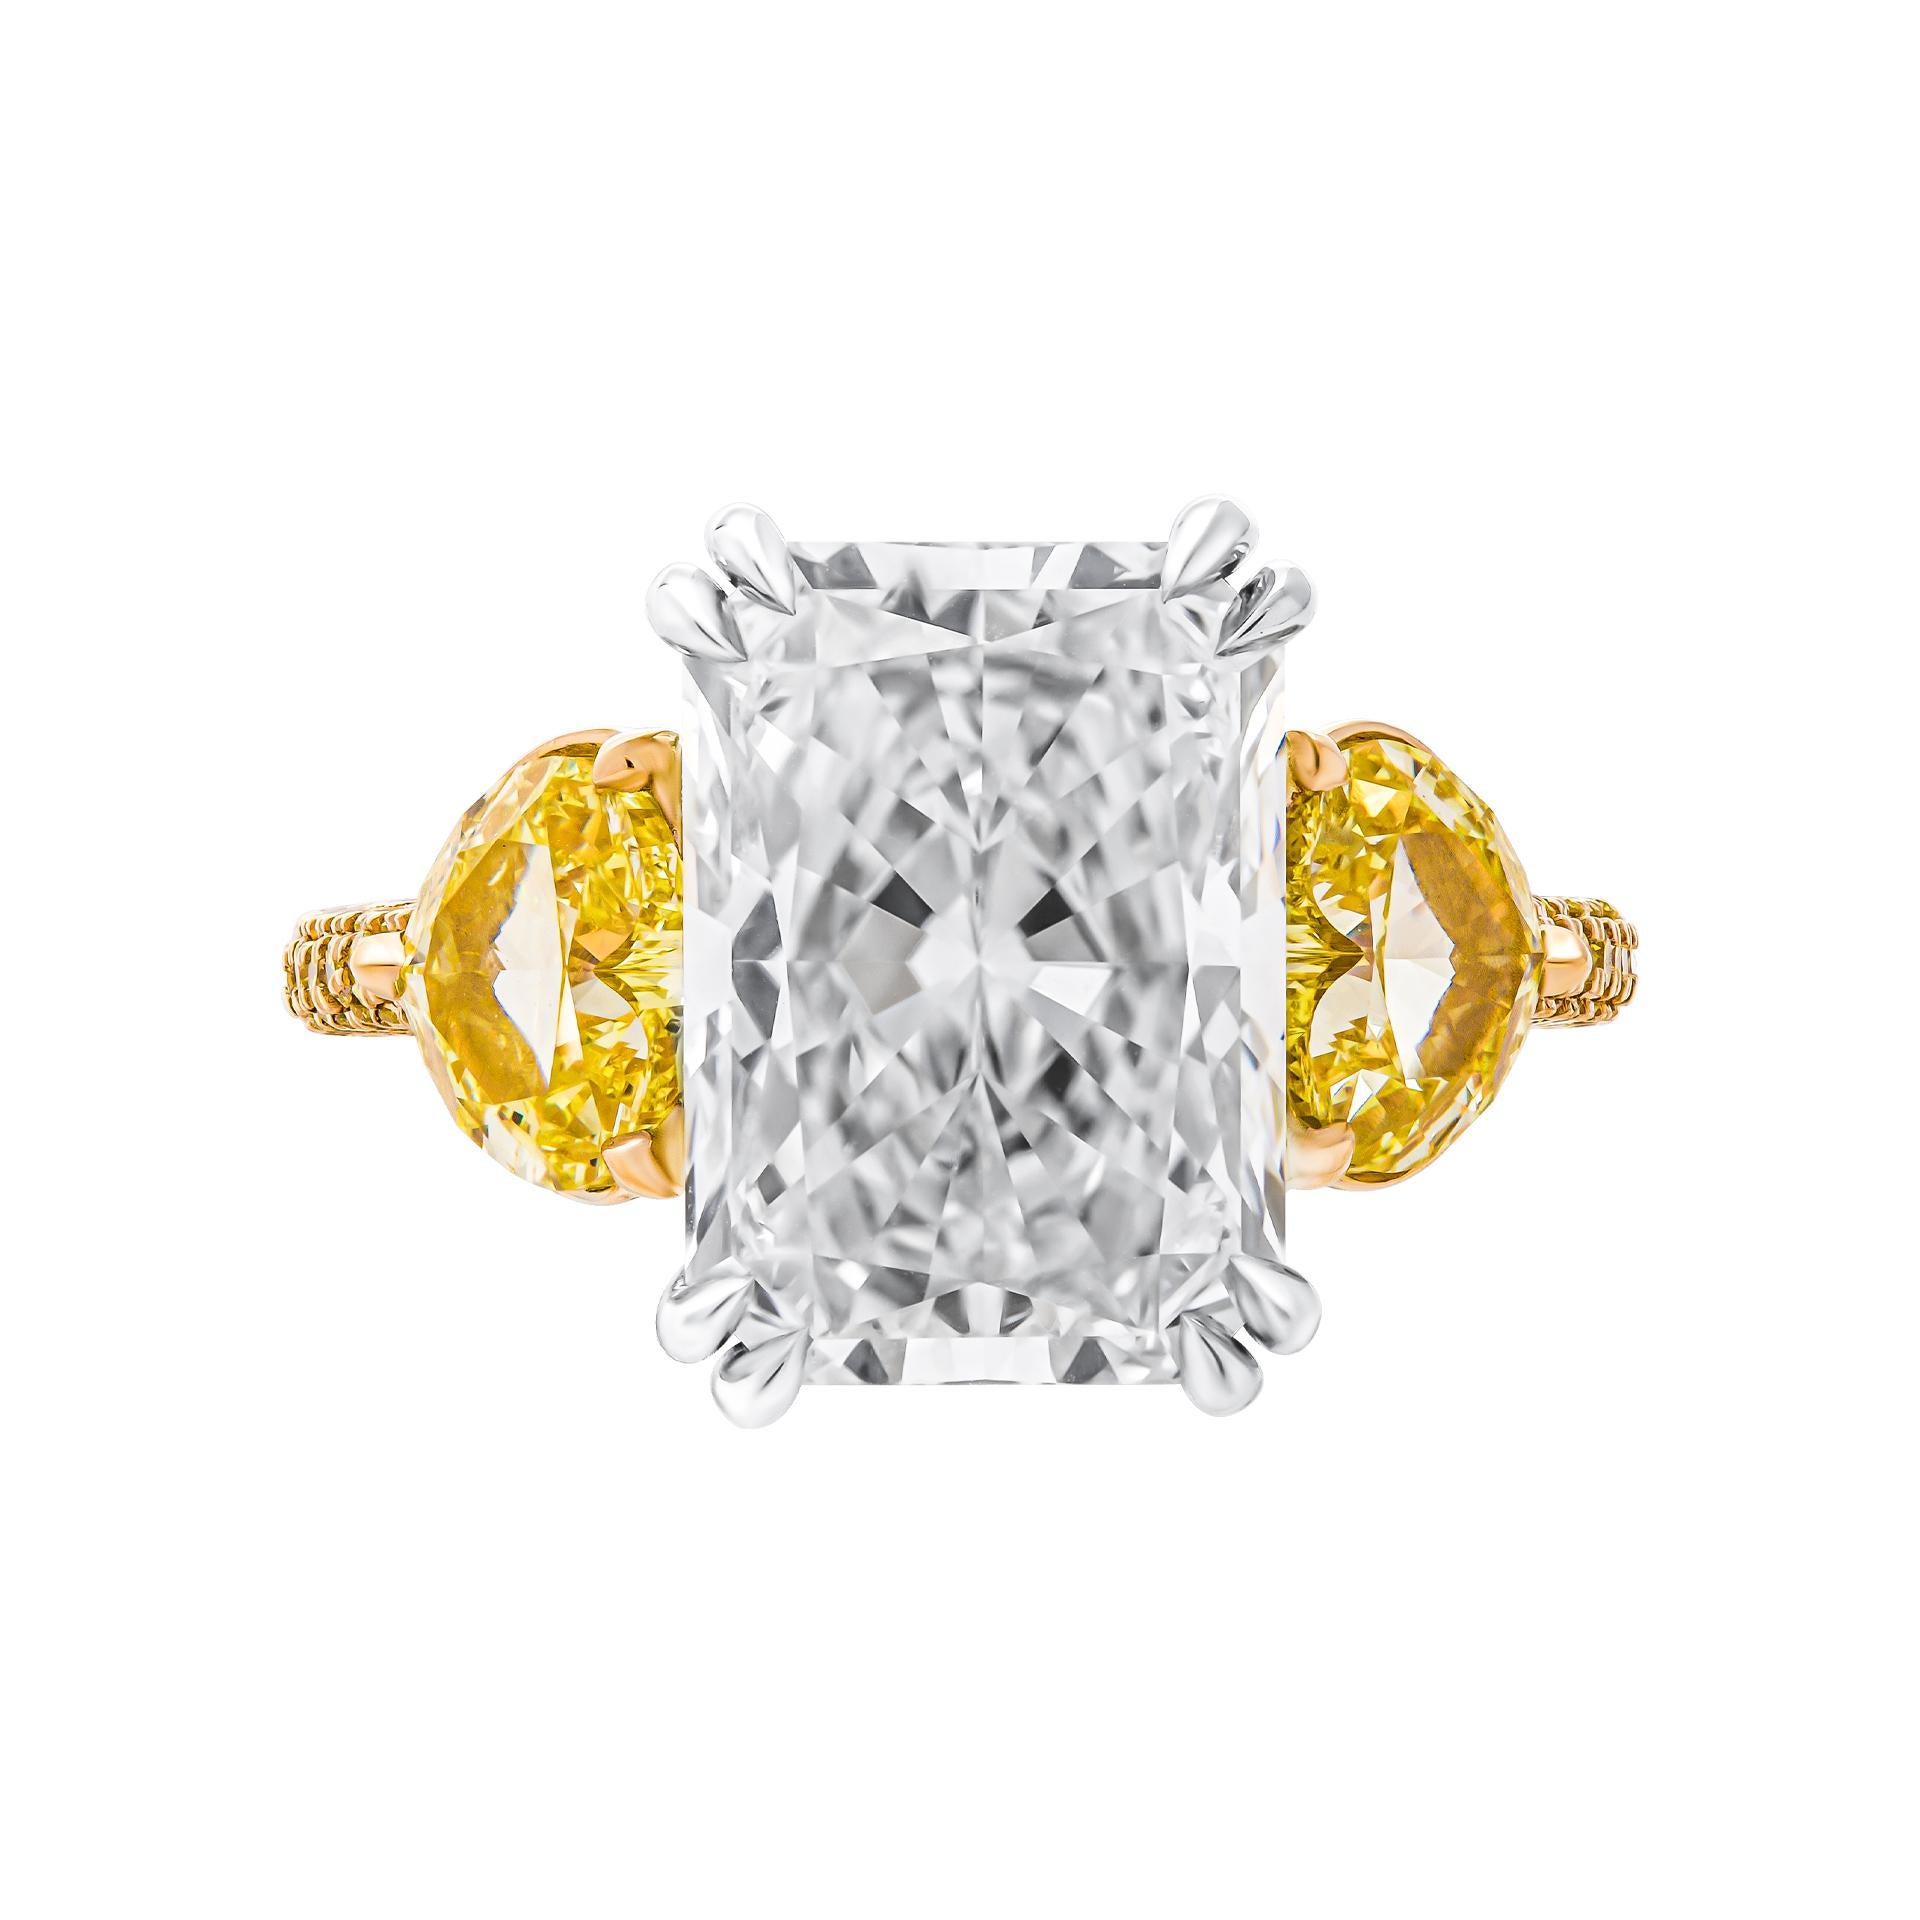 3 stone ring in 18K yellow Gold & PT950
 Center stone: 5.23ct J VVS1 Radiant Shape Diamond GIA#6224068959
 Side stones: 1.01ct Natural Fancy Intense Yellow VS1 GIA#7386744373 
                      1.00ct Natural Fancy Intense Yellow VVS2